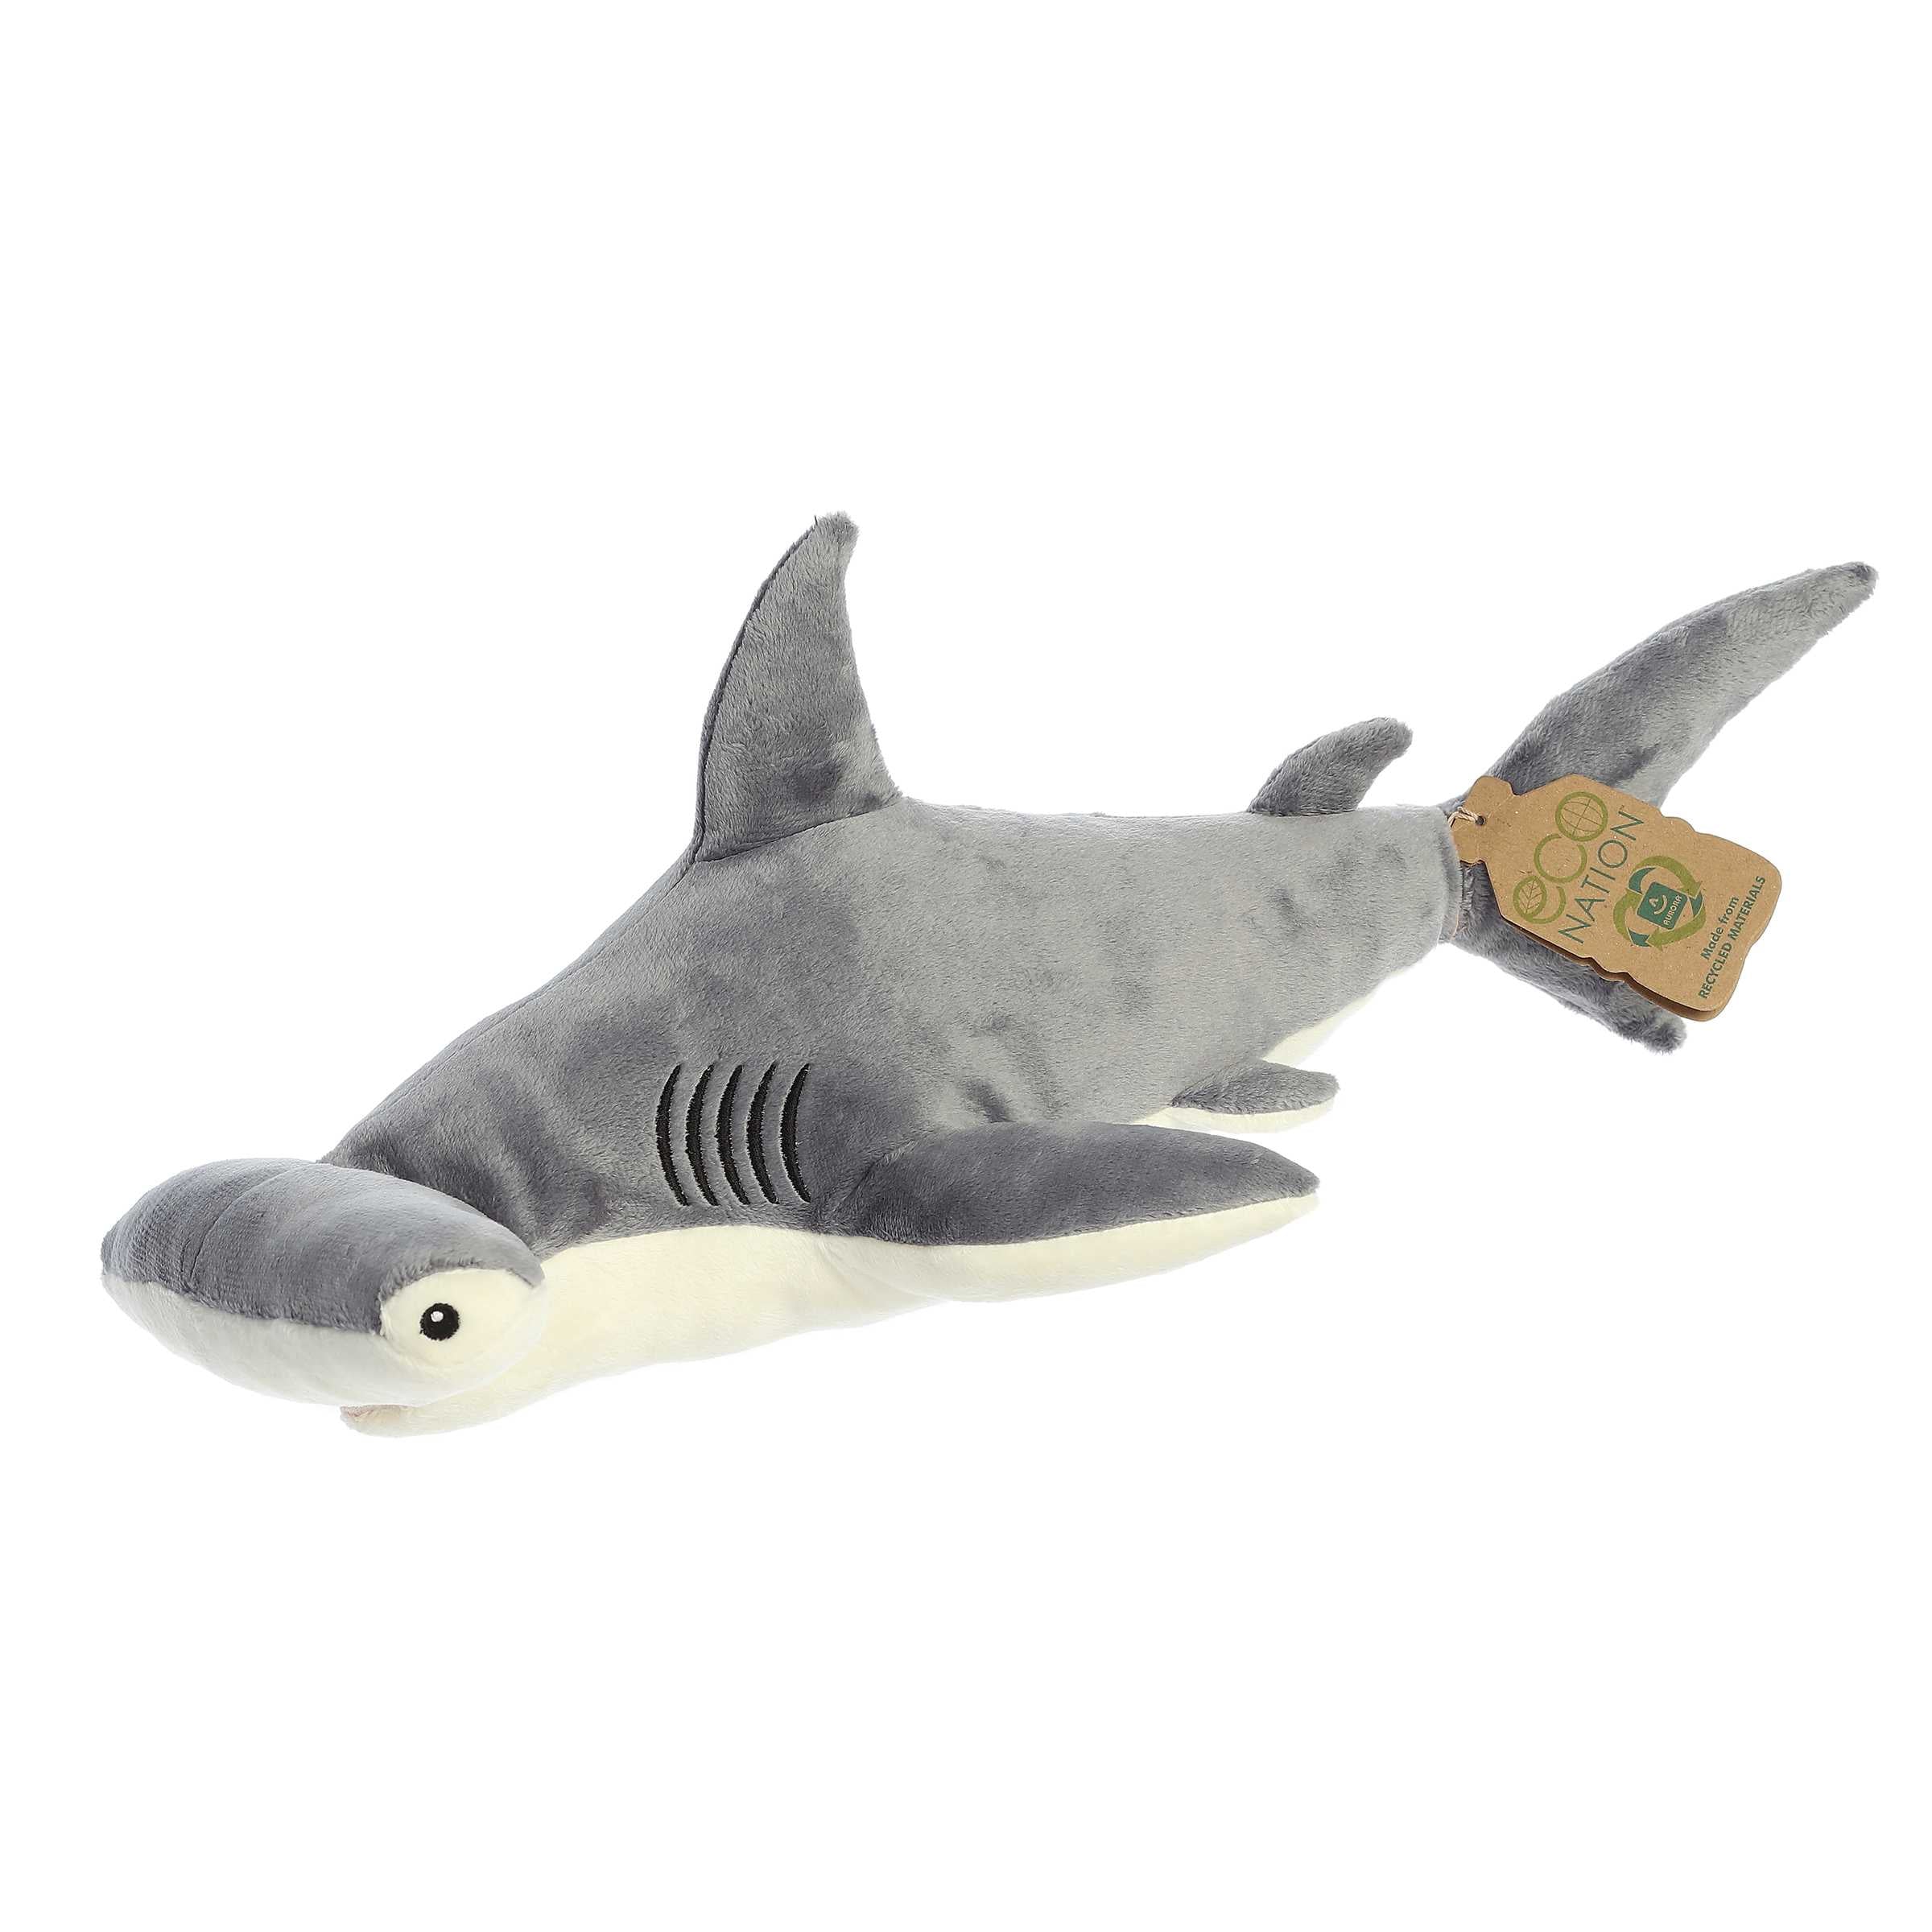 Aurora Eco Hugs Shark Plush, soft gray skin, made from recycled materials with Eco Nation hang tag for conservation.